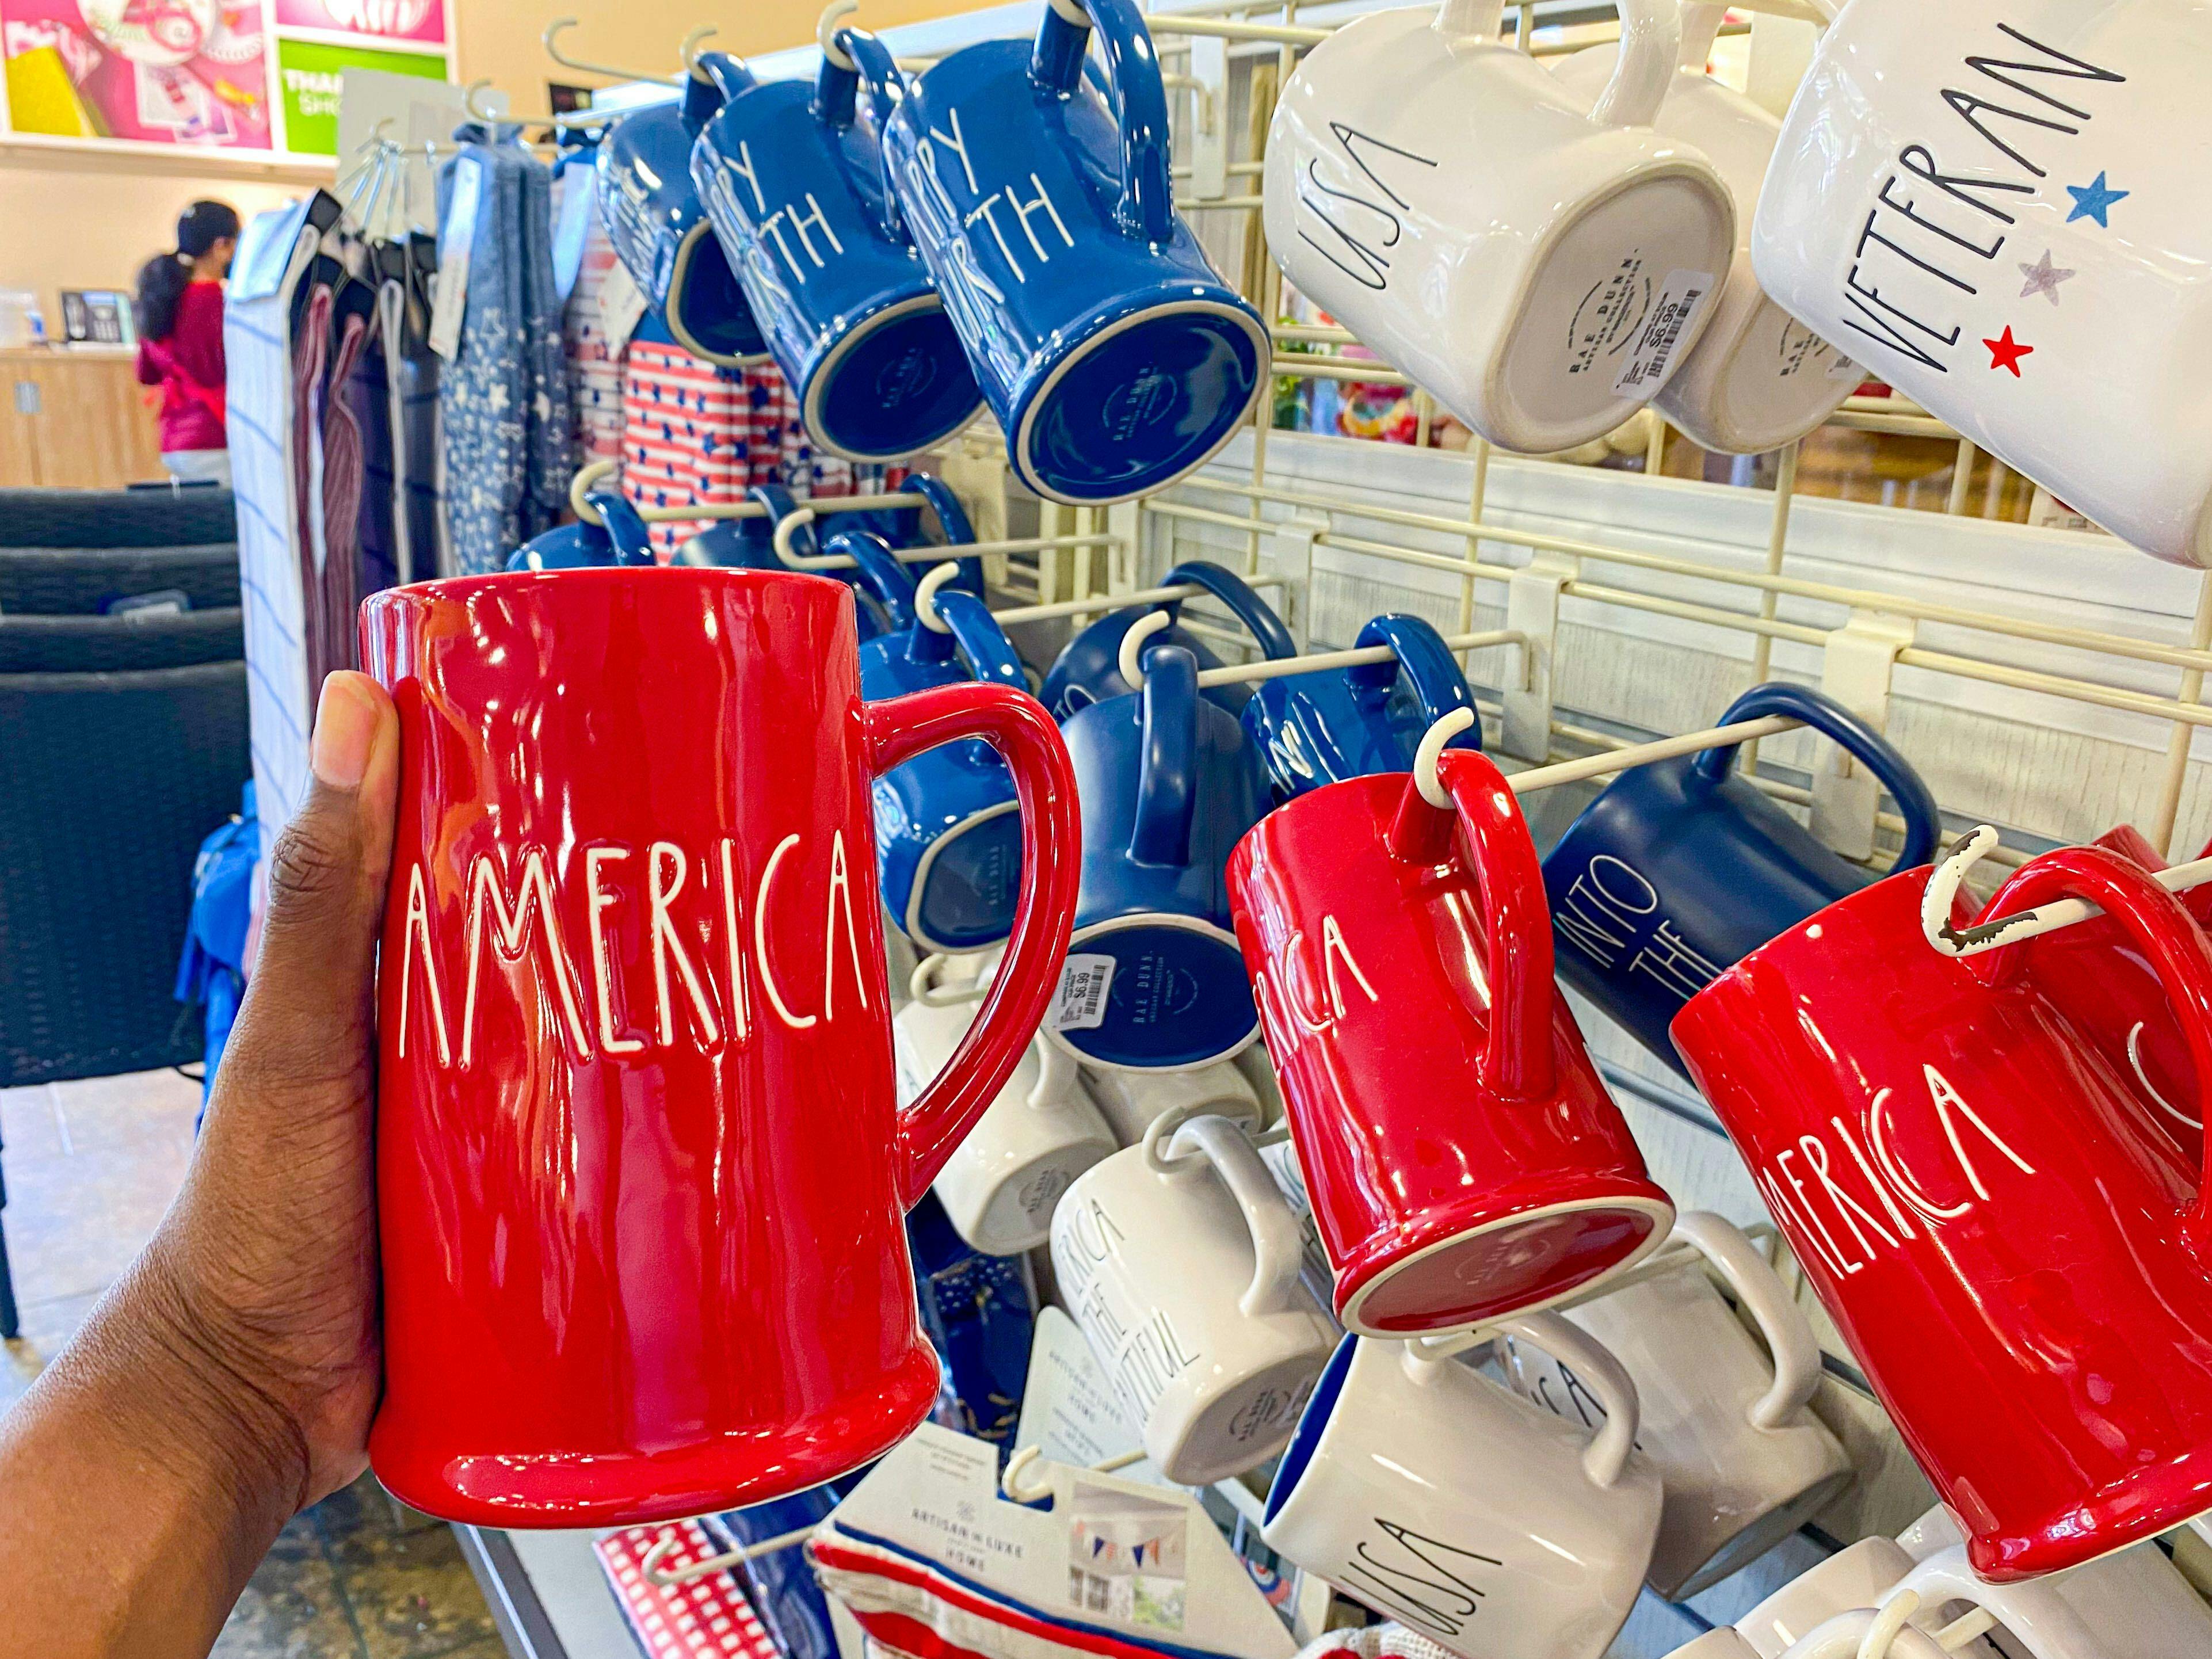 A person's hand holding a Rae Dunn mug that says "America" in front of a display of Americana Rae Dunn mugs.